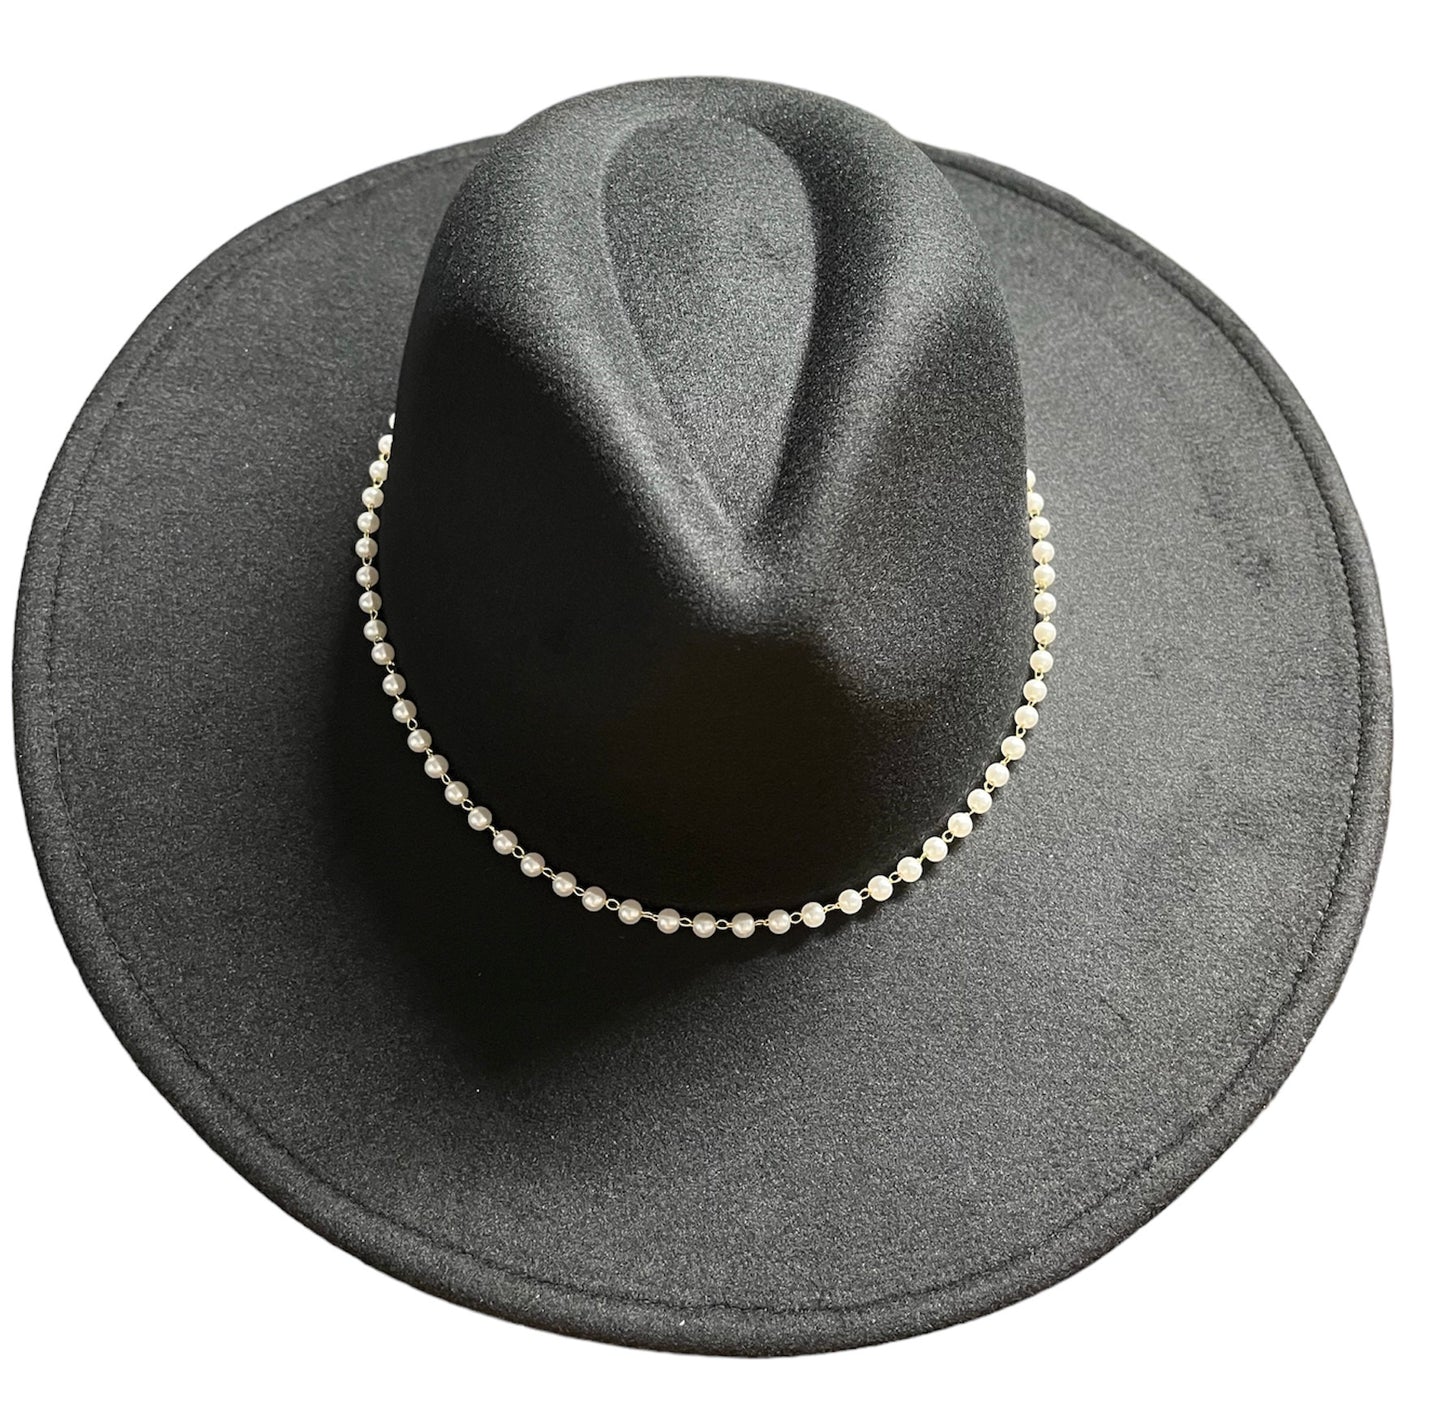 Black Hat with Pearls